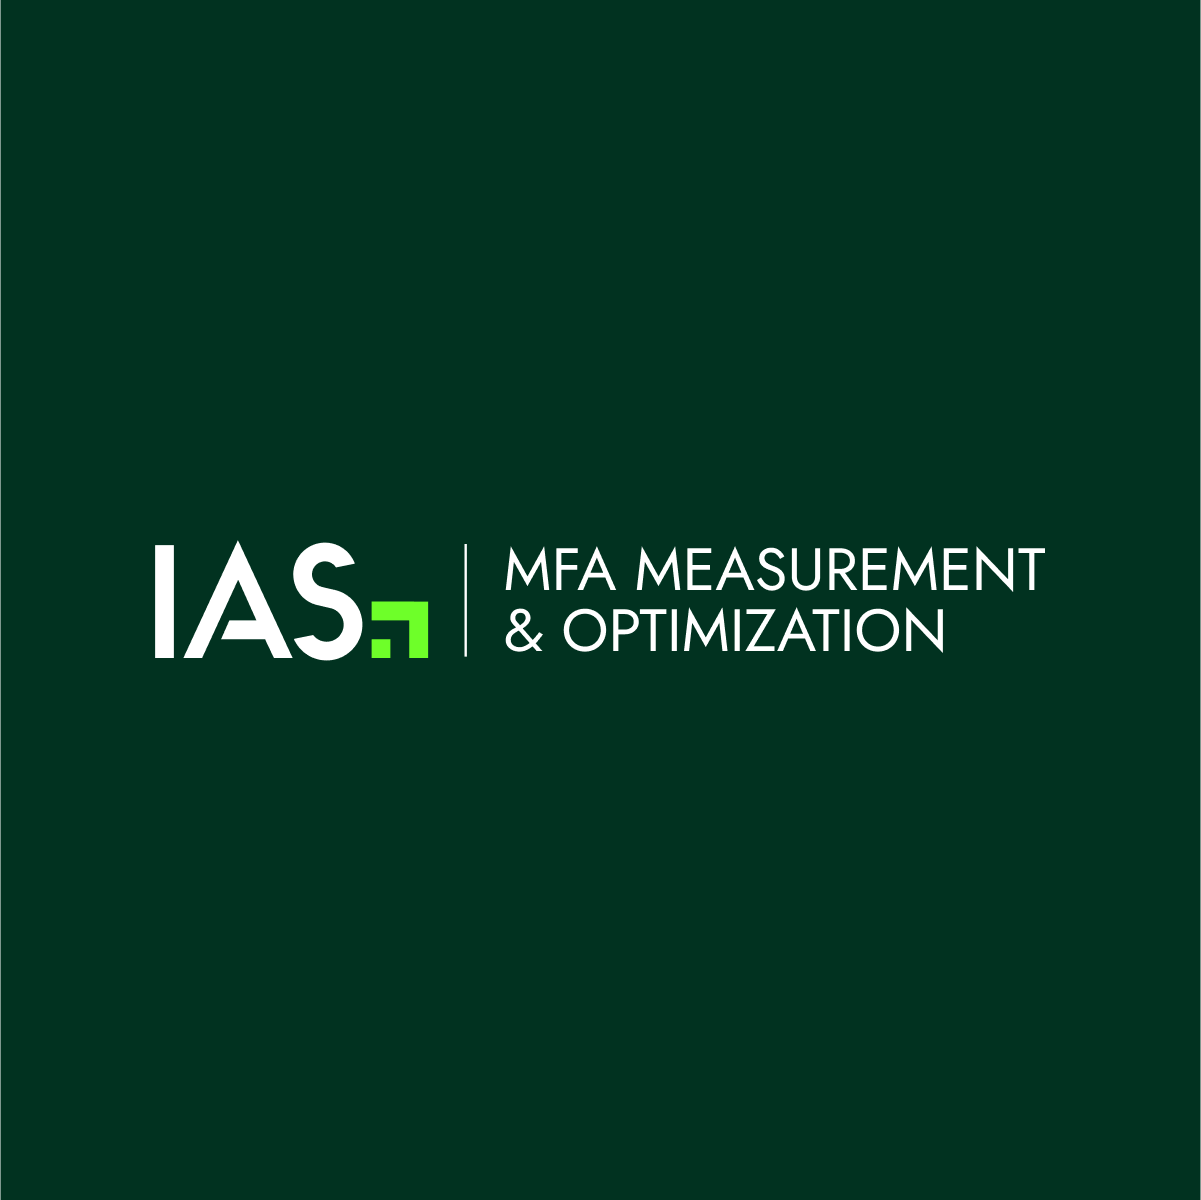 IAS Expands “Made for Advertising” (MFA) AI-Driven Measurement and Optimization Solution with Industry-First Ad Clutter Detection and Avoidance Innovation